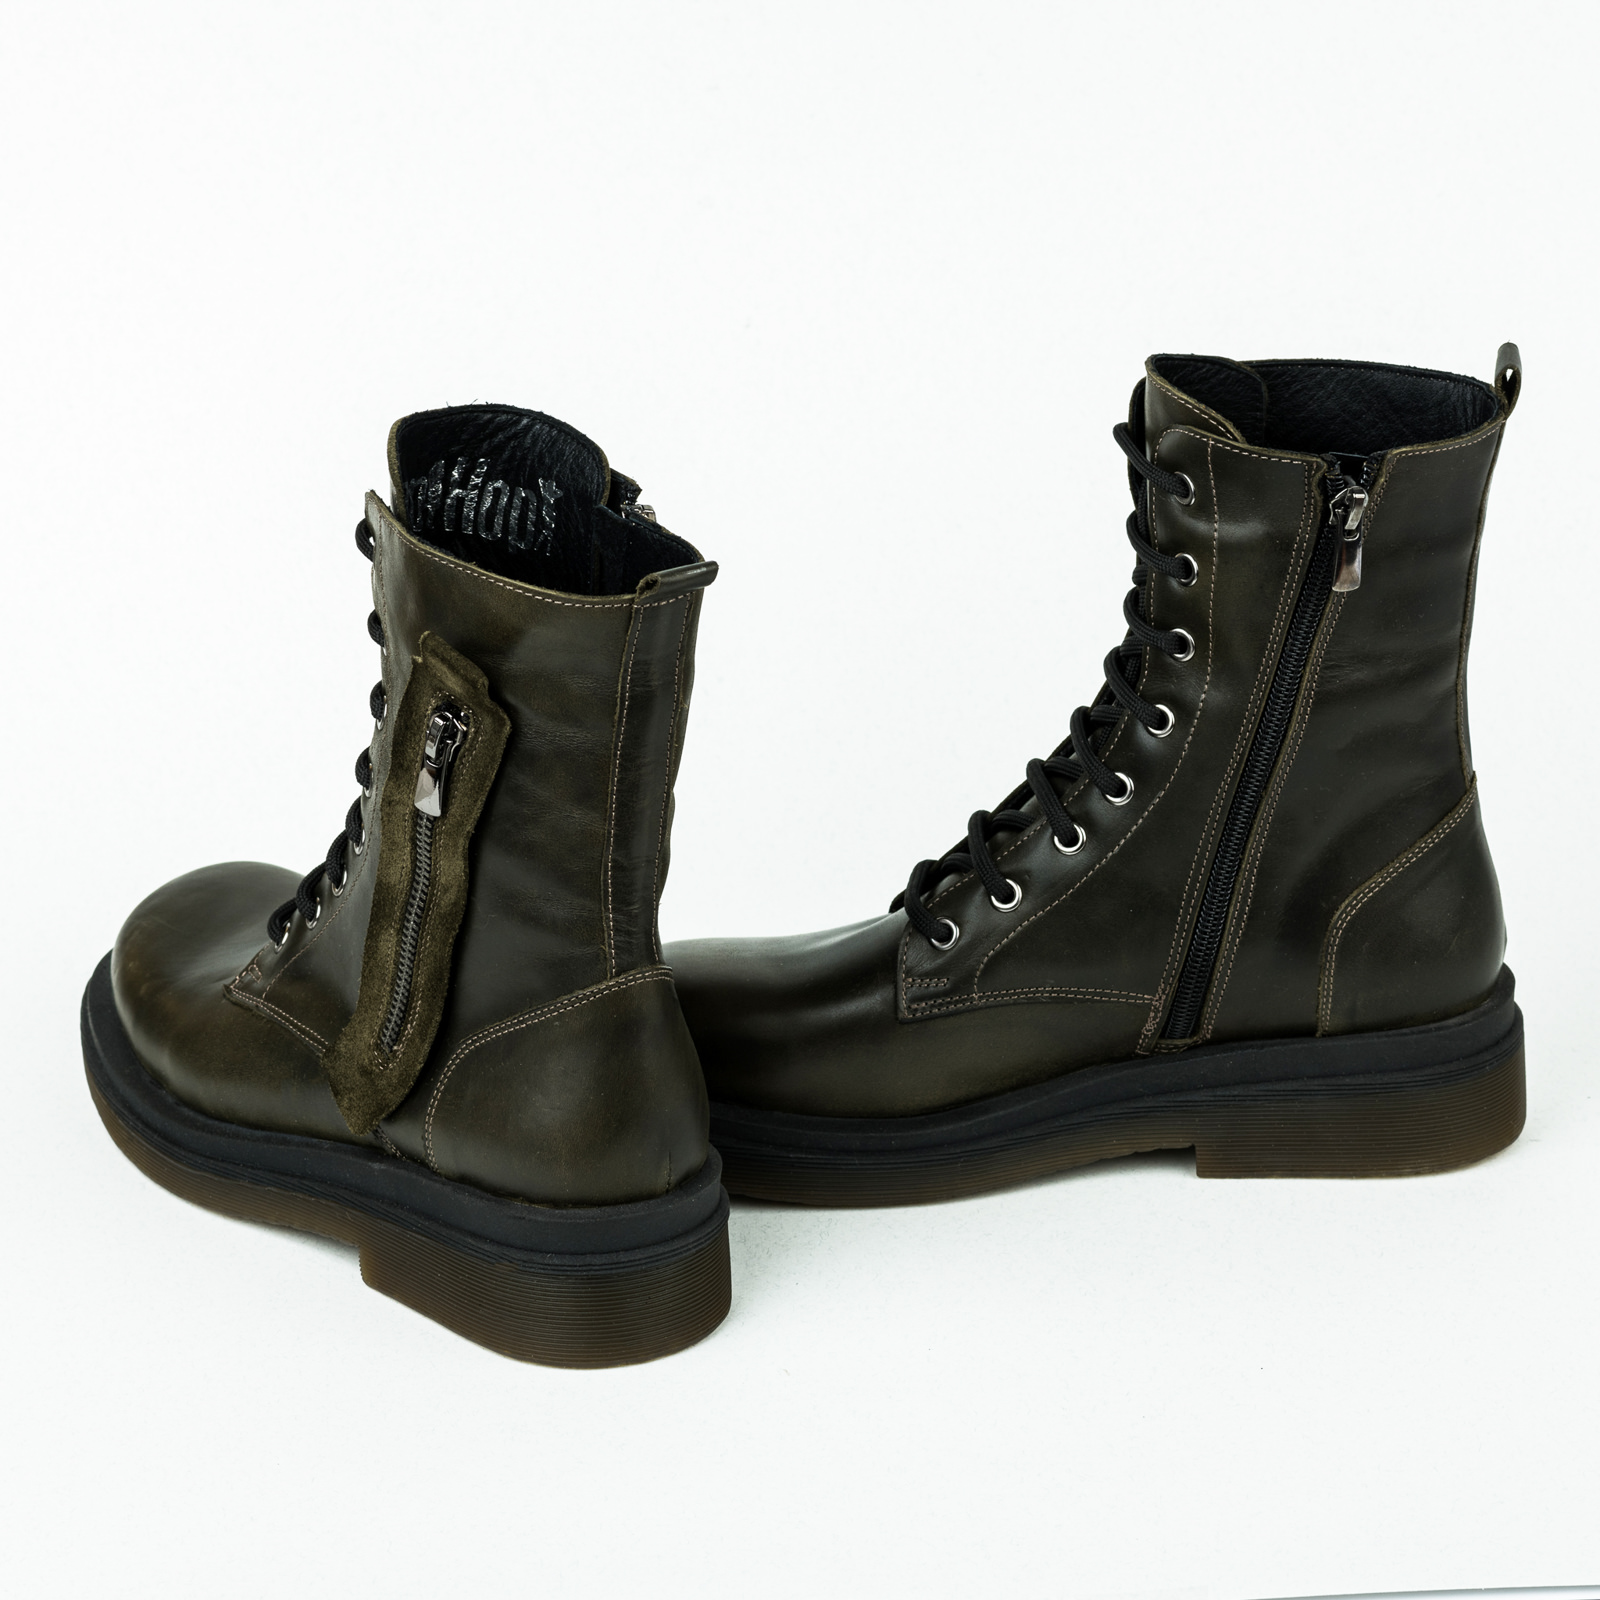 Leather ankle boots B058 - DARK GREEN